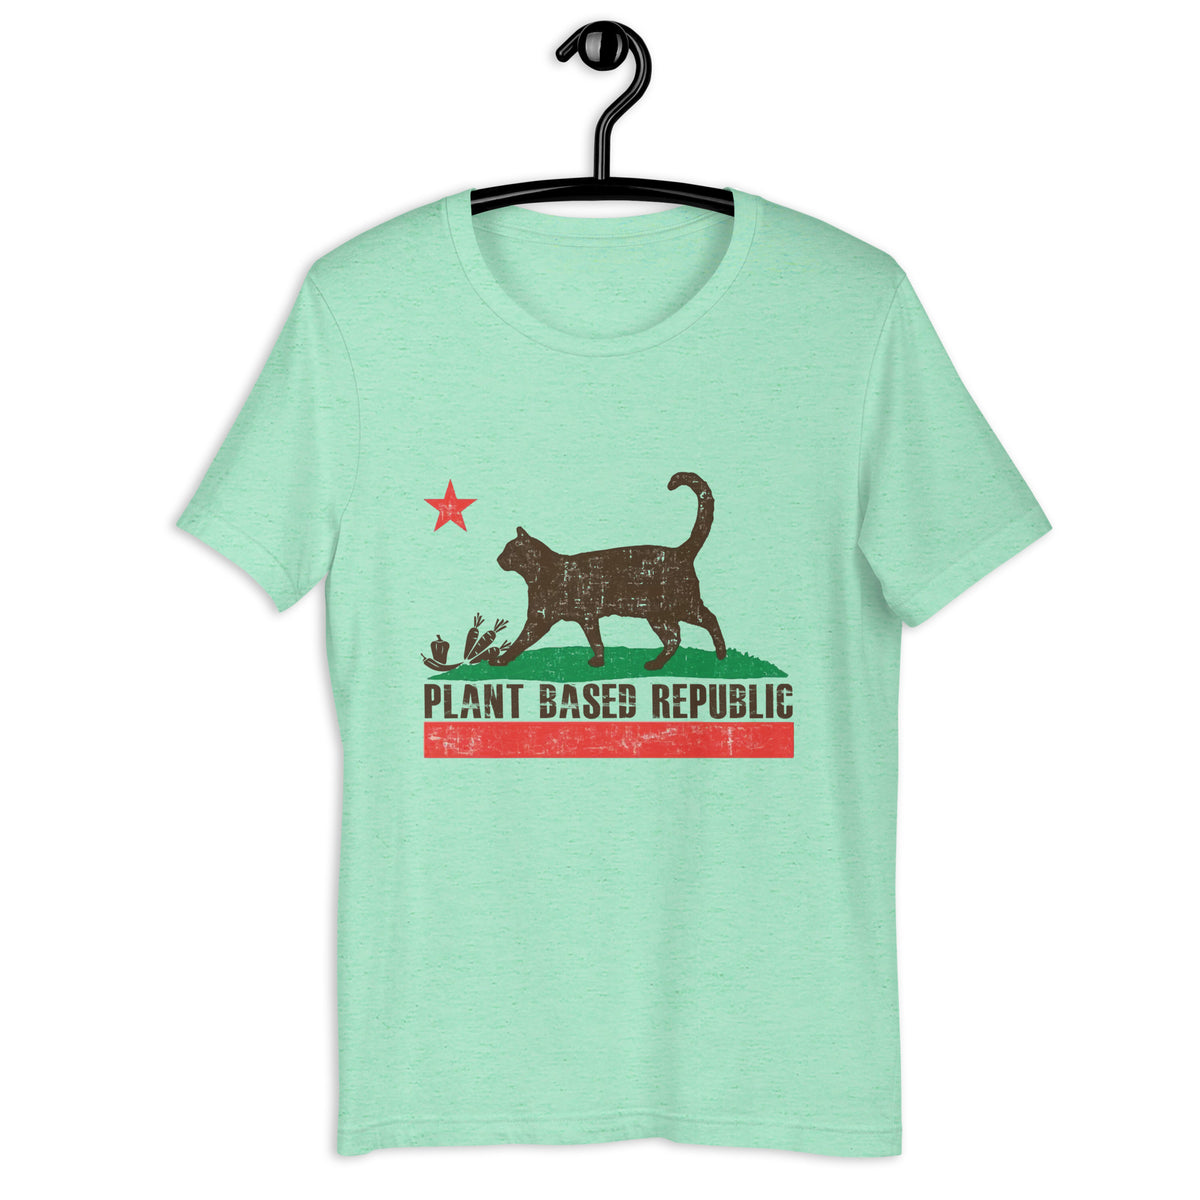 PLANT BASED REPUBLIC Colored t-shirt